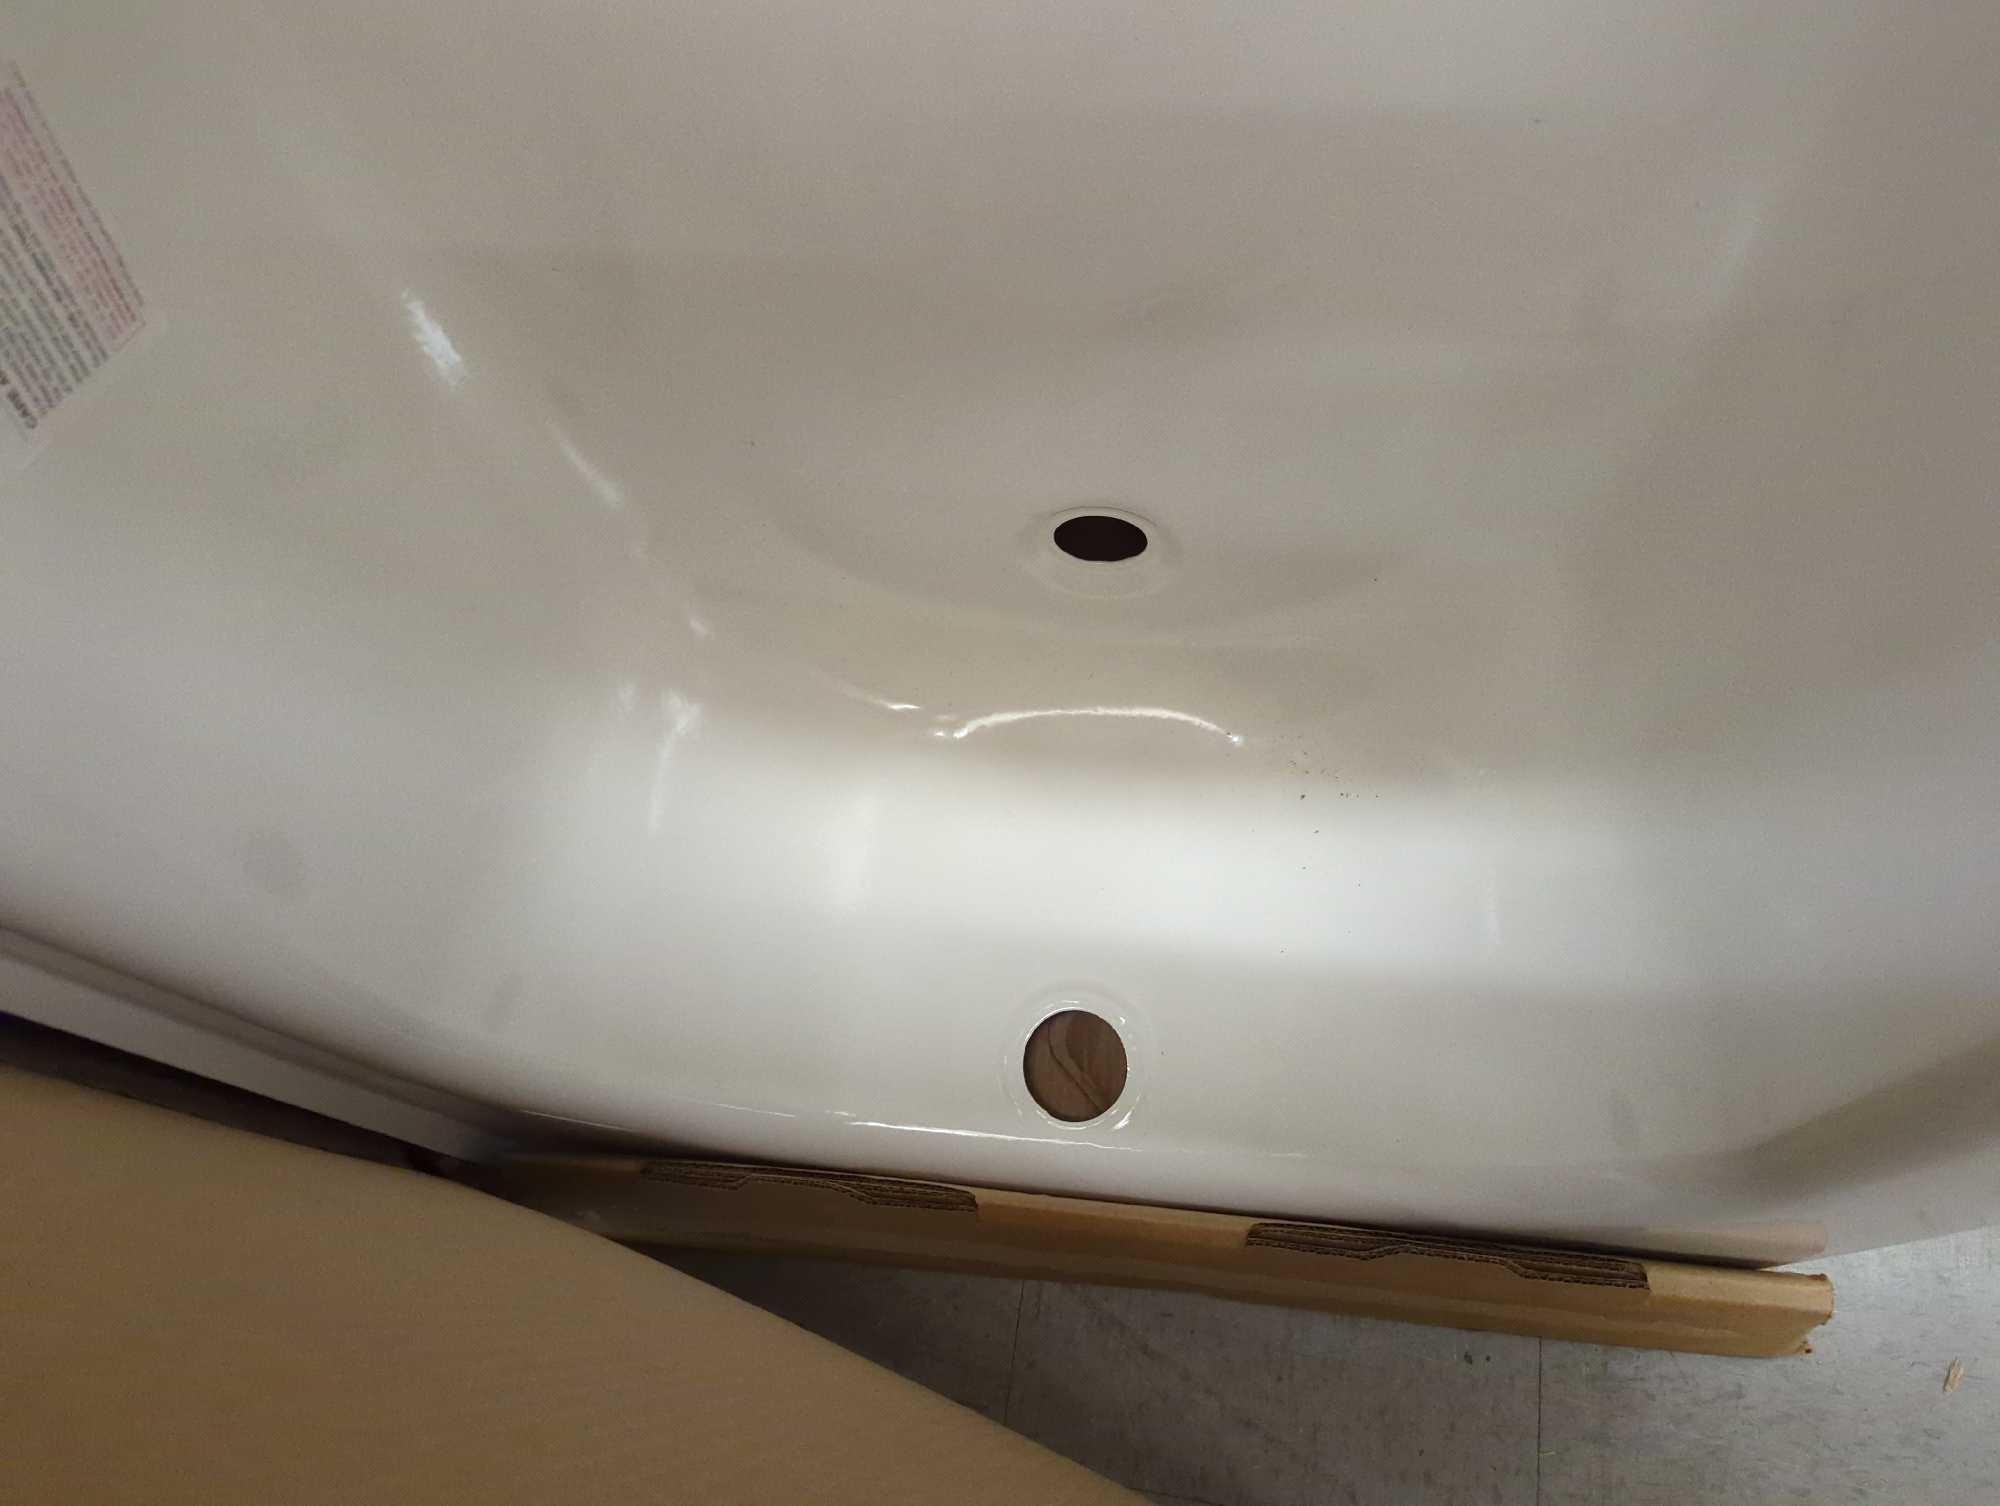 Bootz Industries Kona 54 in. x 30 in. Soaking Bathtub with Right Drain in White, Appears to be New